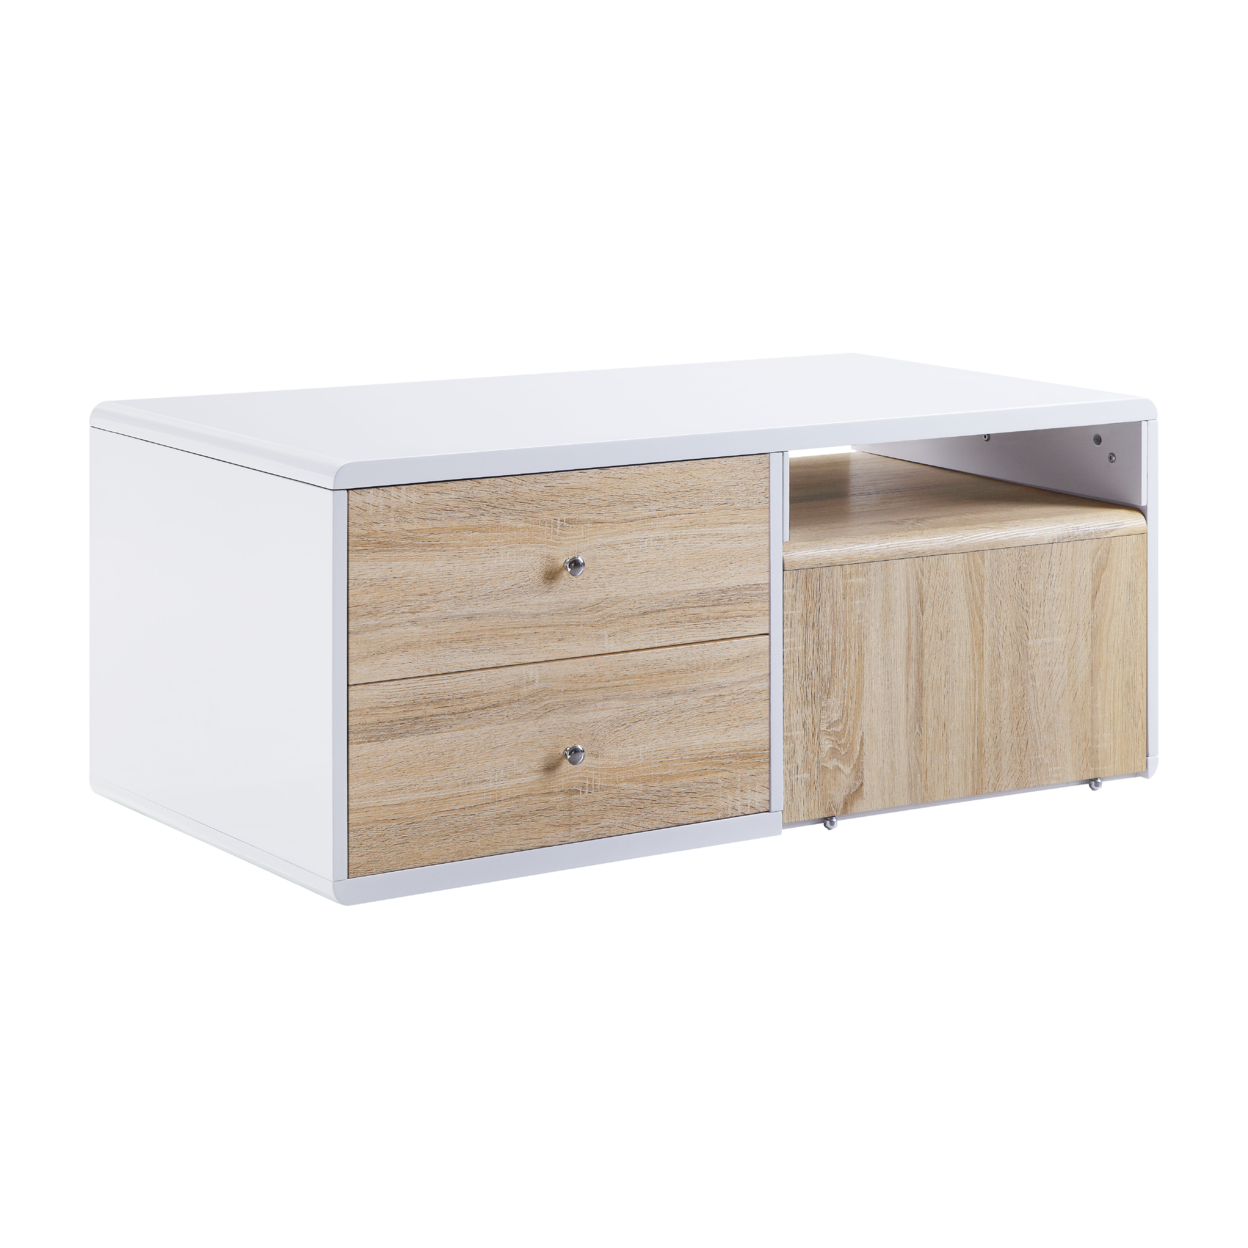 2 Drawer Contemporary Coffee Table With Pull Out Table, White And Brown- Saltoro Sherpi